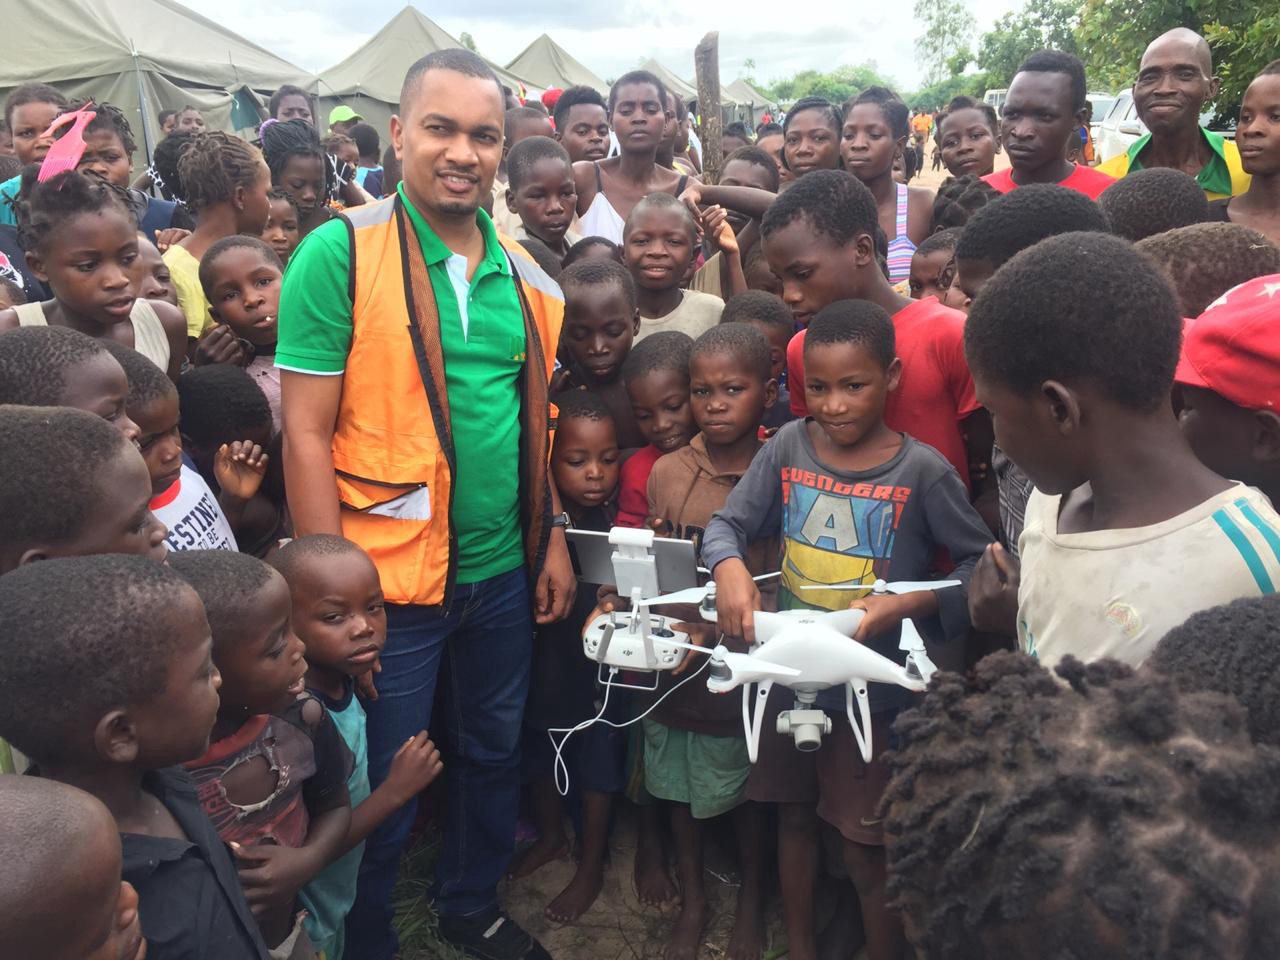 Flying drones often attracts attention from children in the area. Photo: WFP/Pedro Matos.